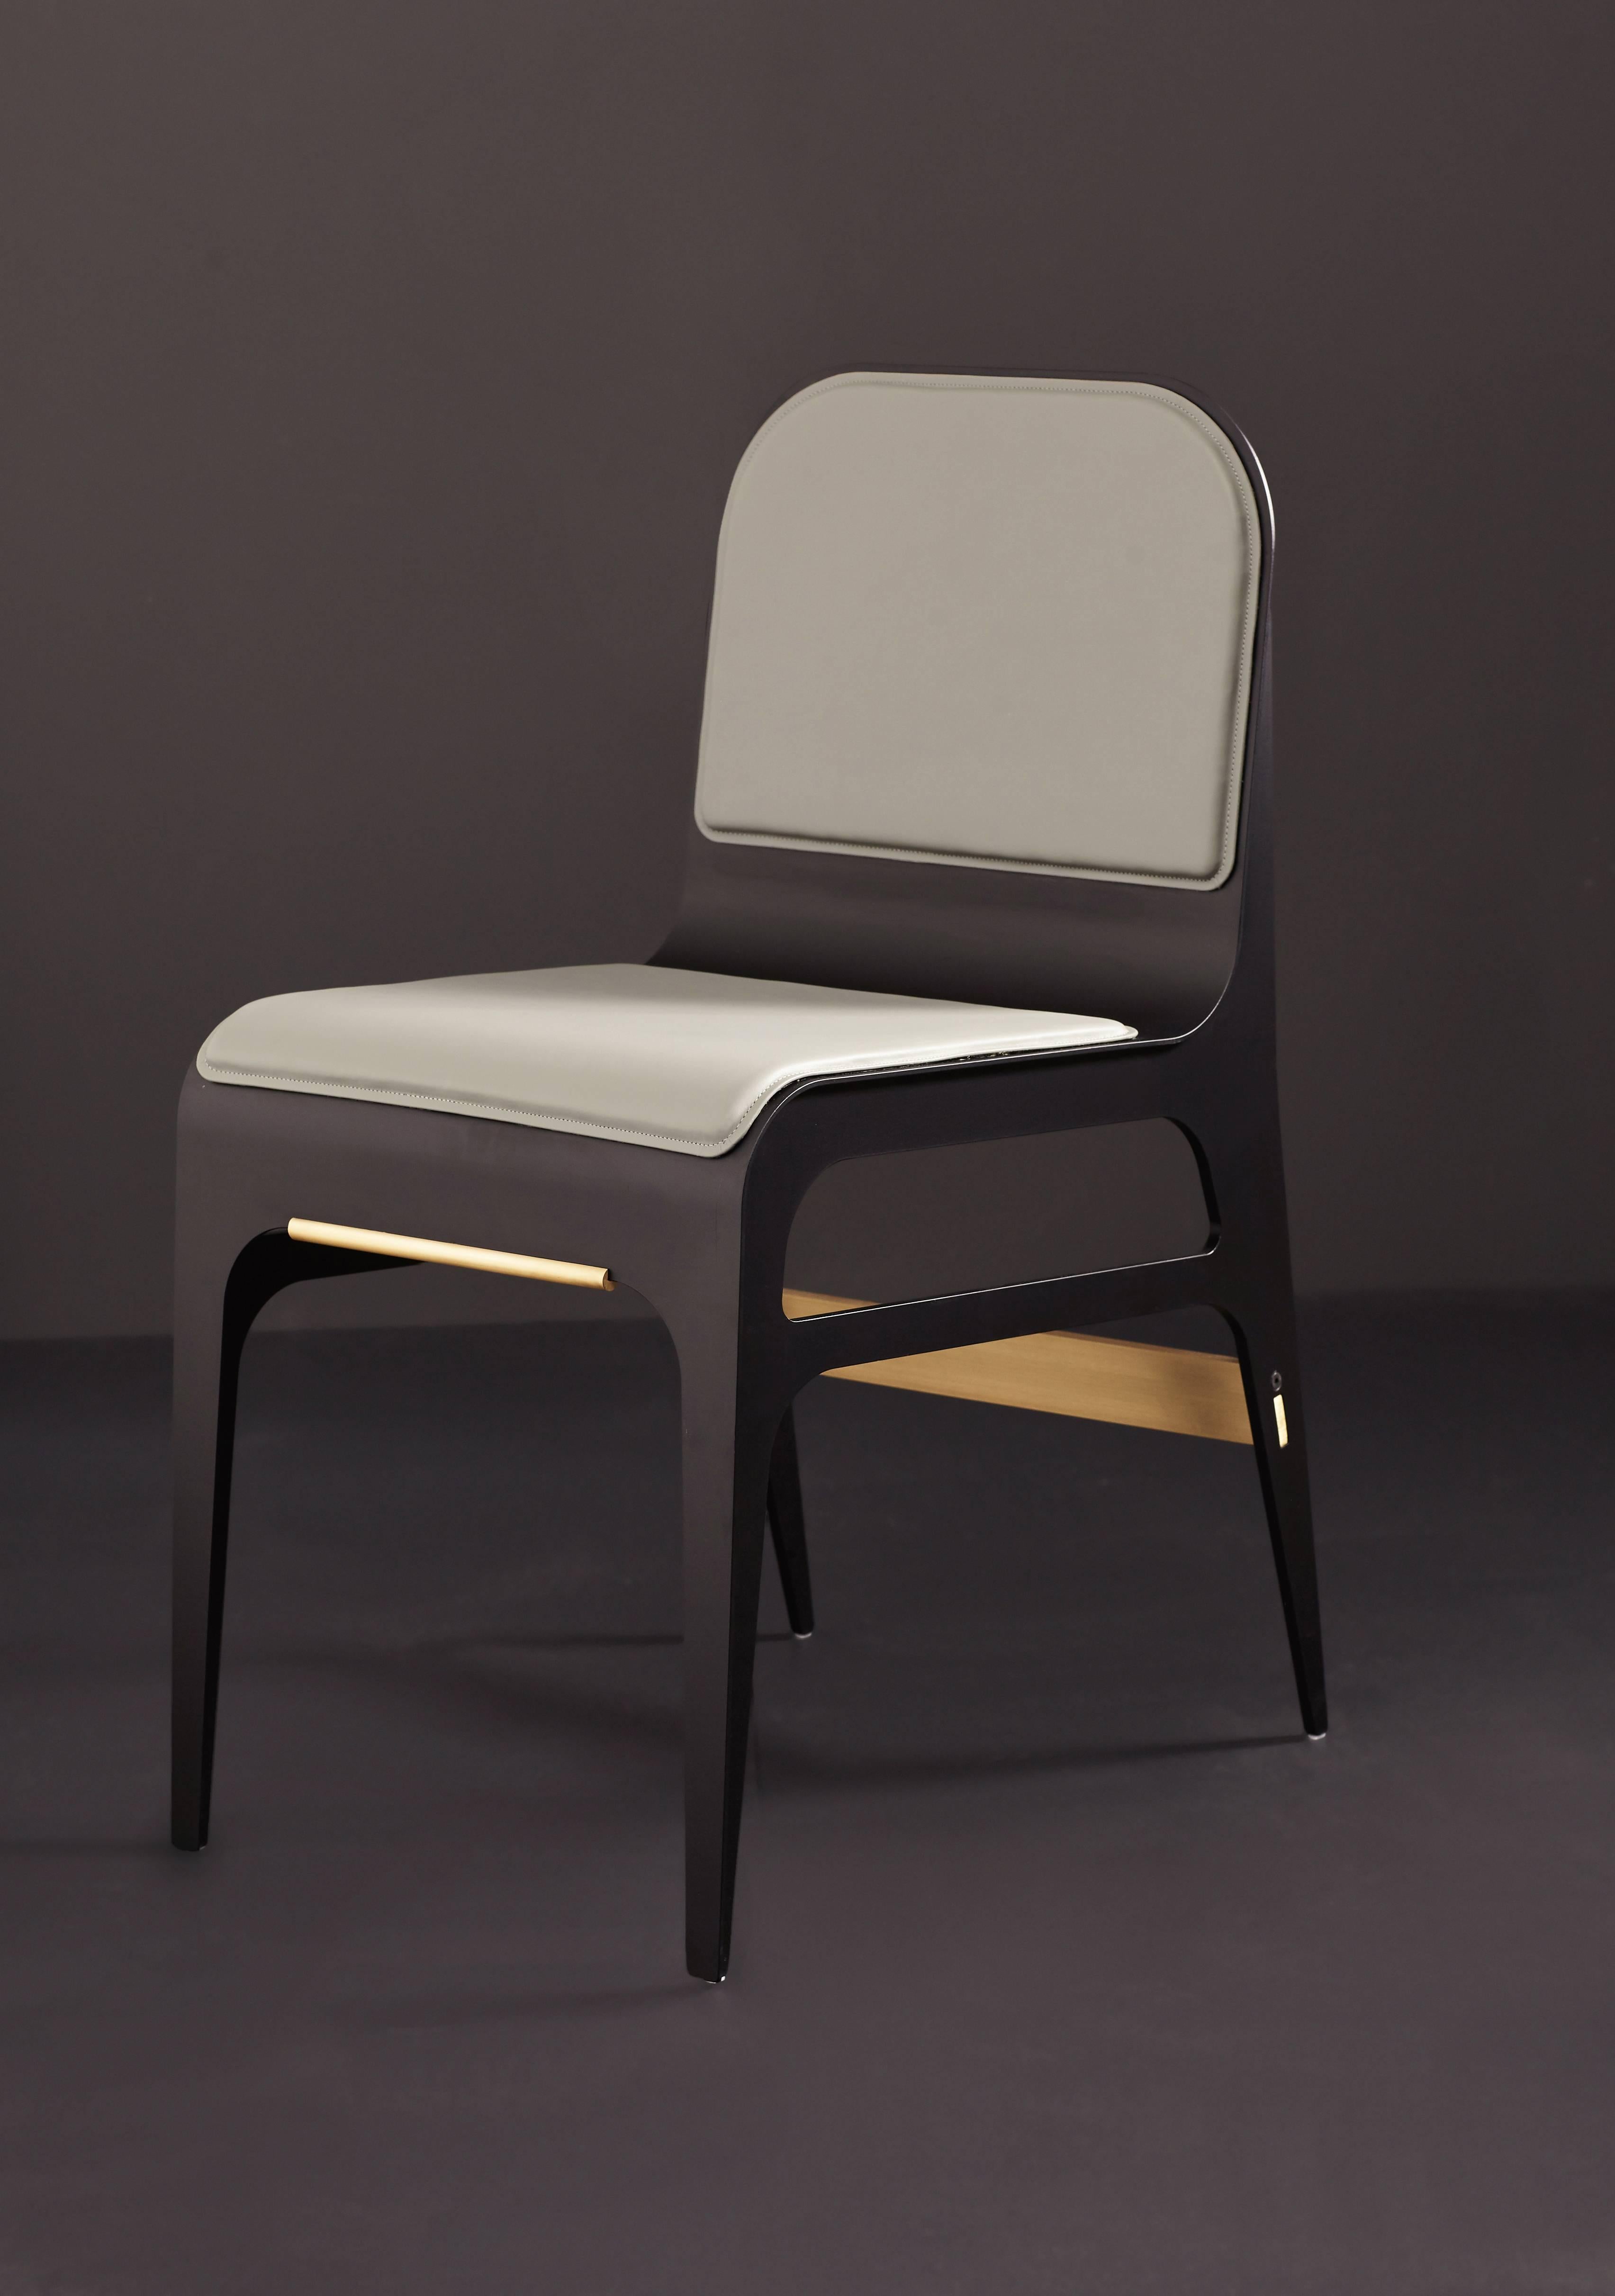 The epitome of chic, with distinct legs and a beautiful silhouette, the BARDOT
series is aptly named after the French style icon.
Strutting atop a base of black steel with distinct brass, copper and nickel hardware;
thin profiled seats and back